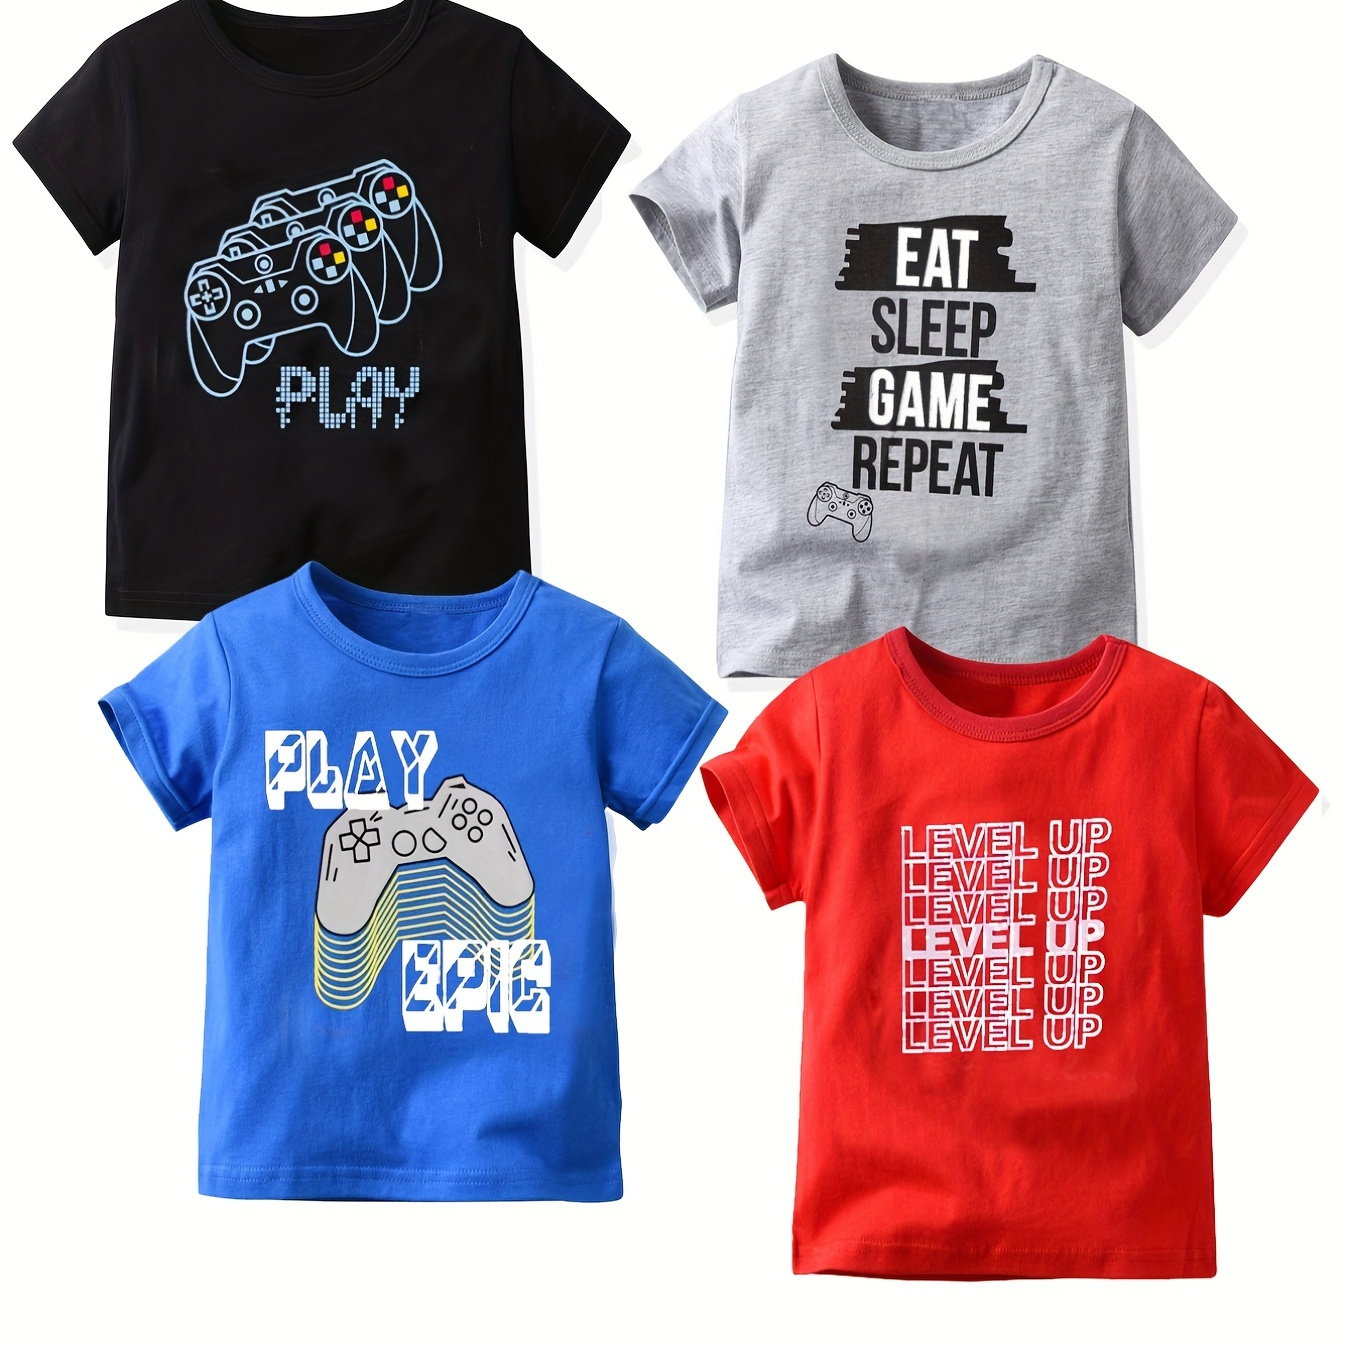 

4pcs Boys Stylish Gamepad And Letter Print Boys Creative T-shirt, Casual Lightweight Comfy Short Sleeve Crew Neck Tee Tops, Kids Clothings For Summer